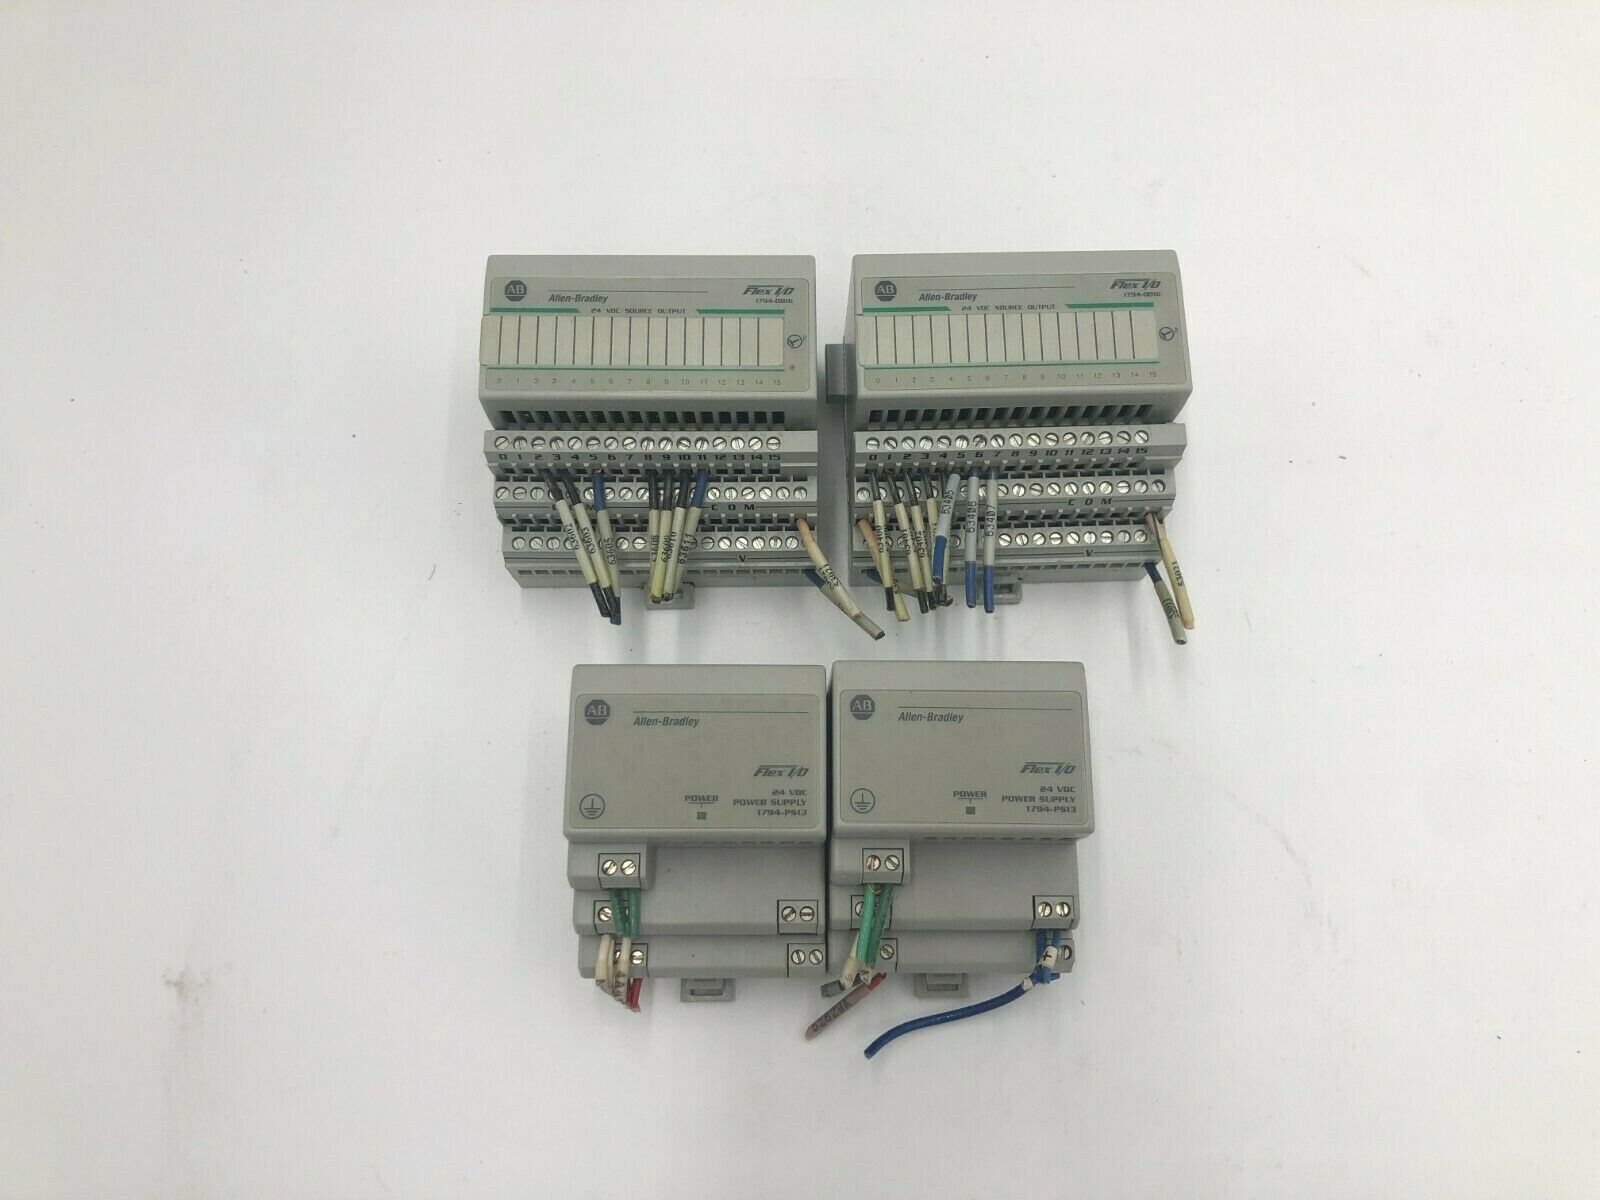 ALLEN BRADLEY 1794-PS13 AND 1794-OB16 LOT OF 4 STOCK 1074